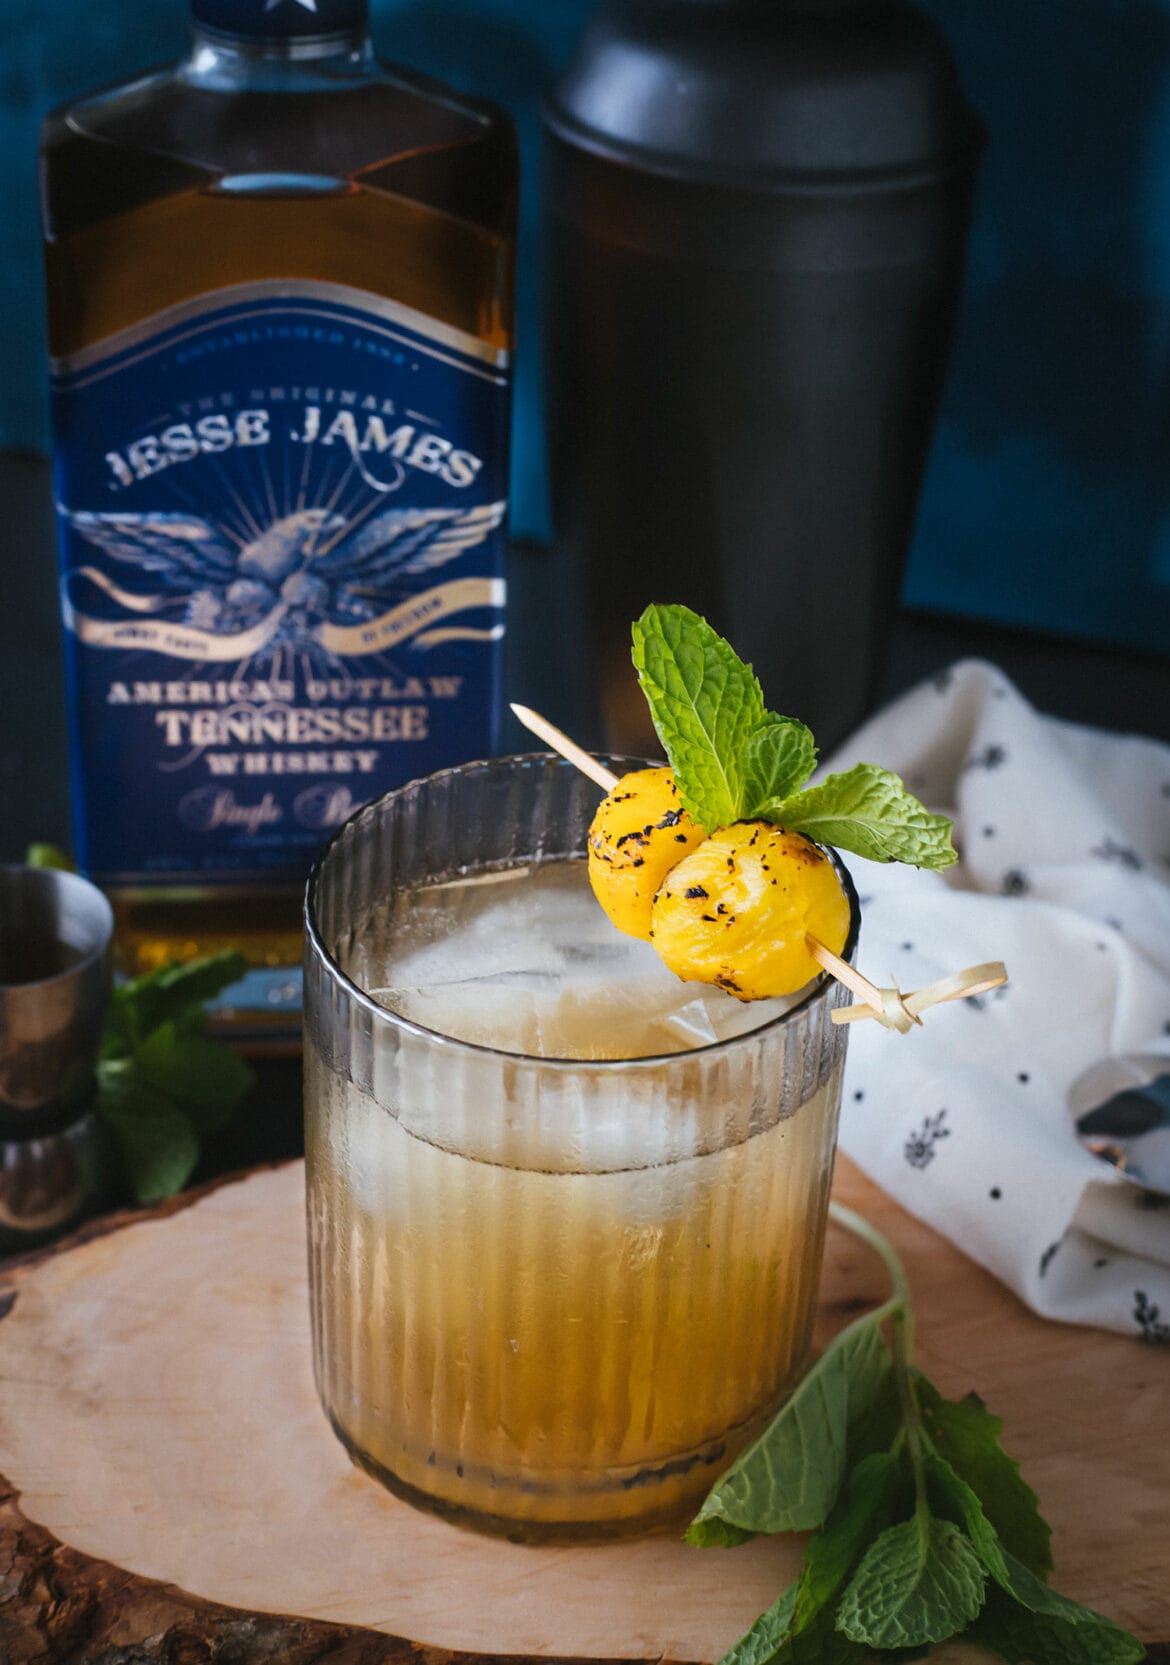 A glass of hula fashioned cocktail with pineapple syrup with mint and grilled pineapple balls for garnish, served on a wooden serving tray with a bottle of whiskey blurry in the background